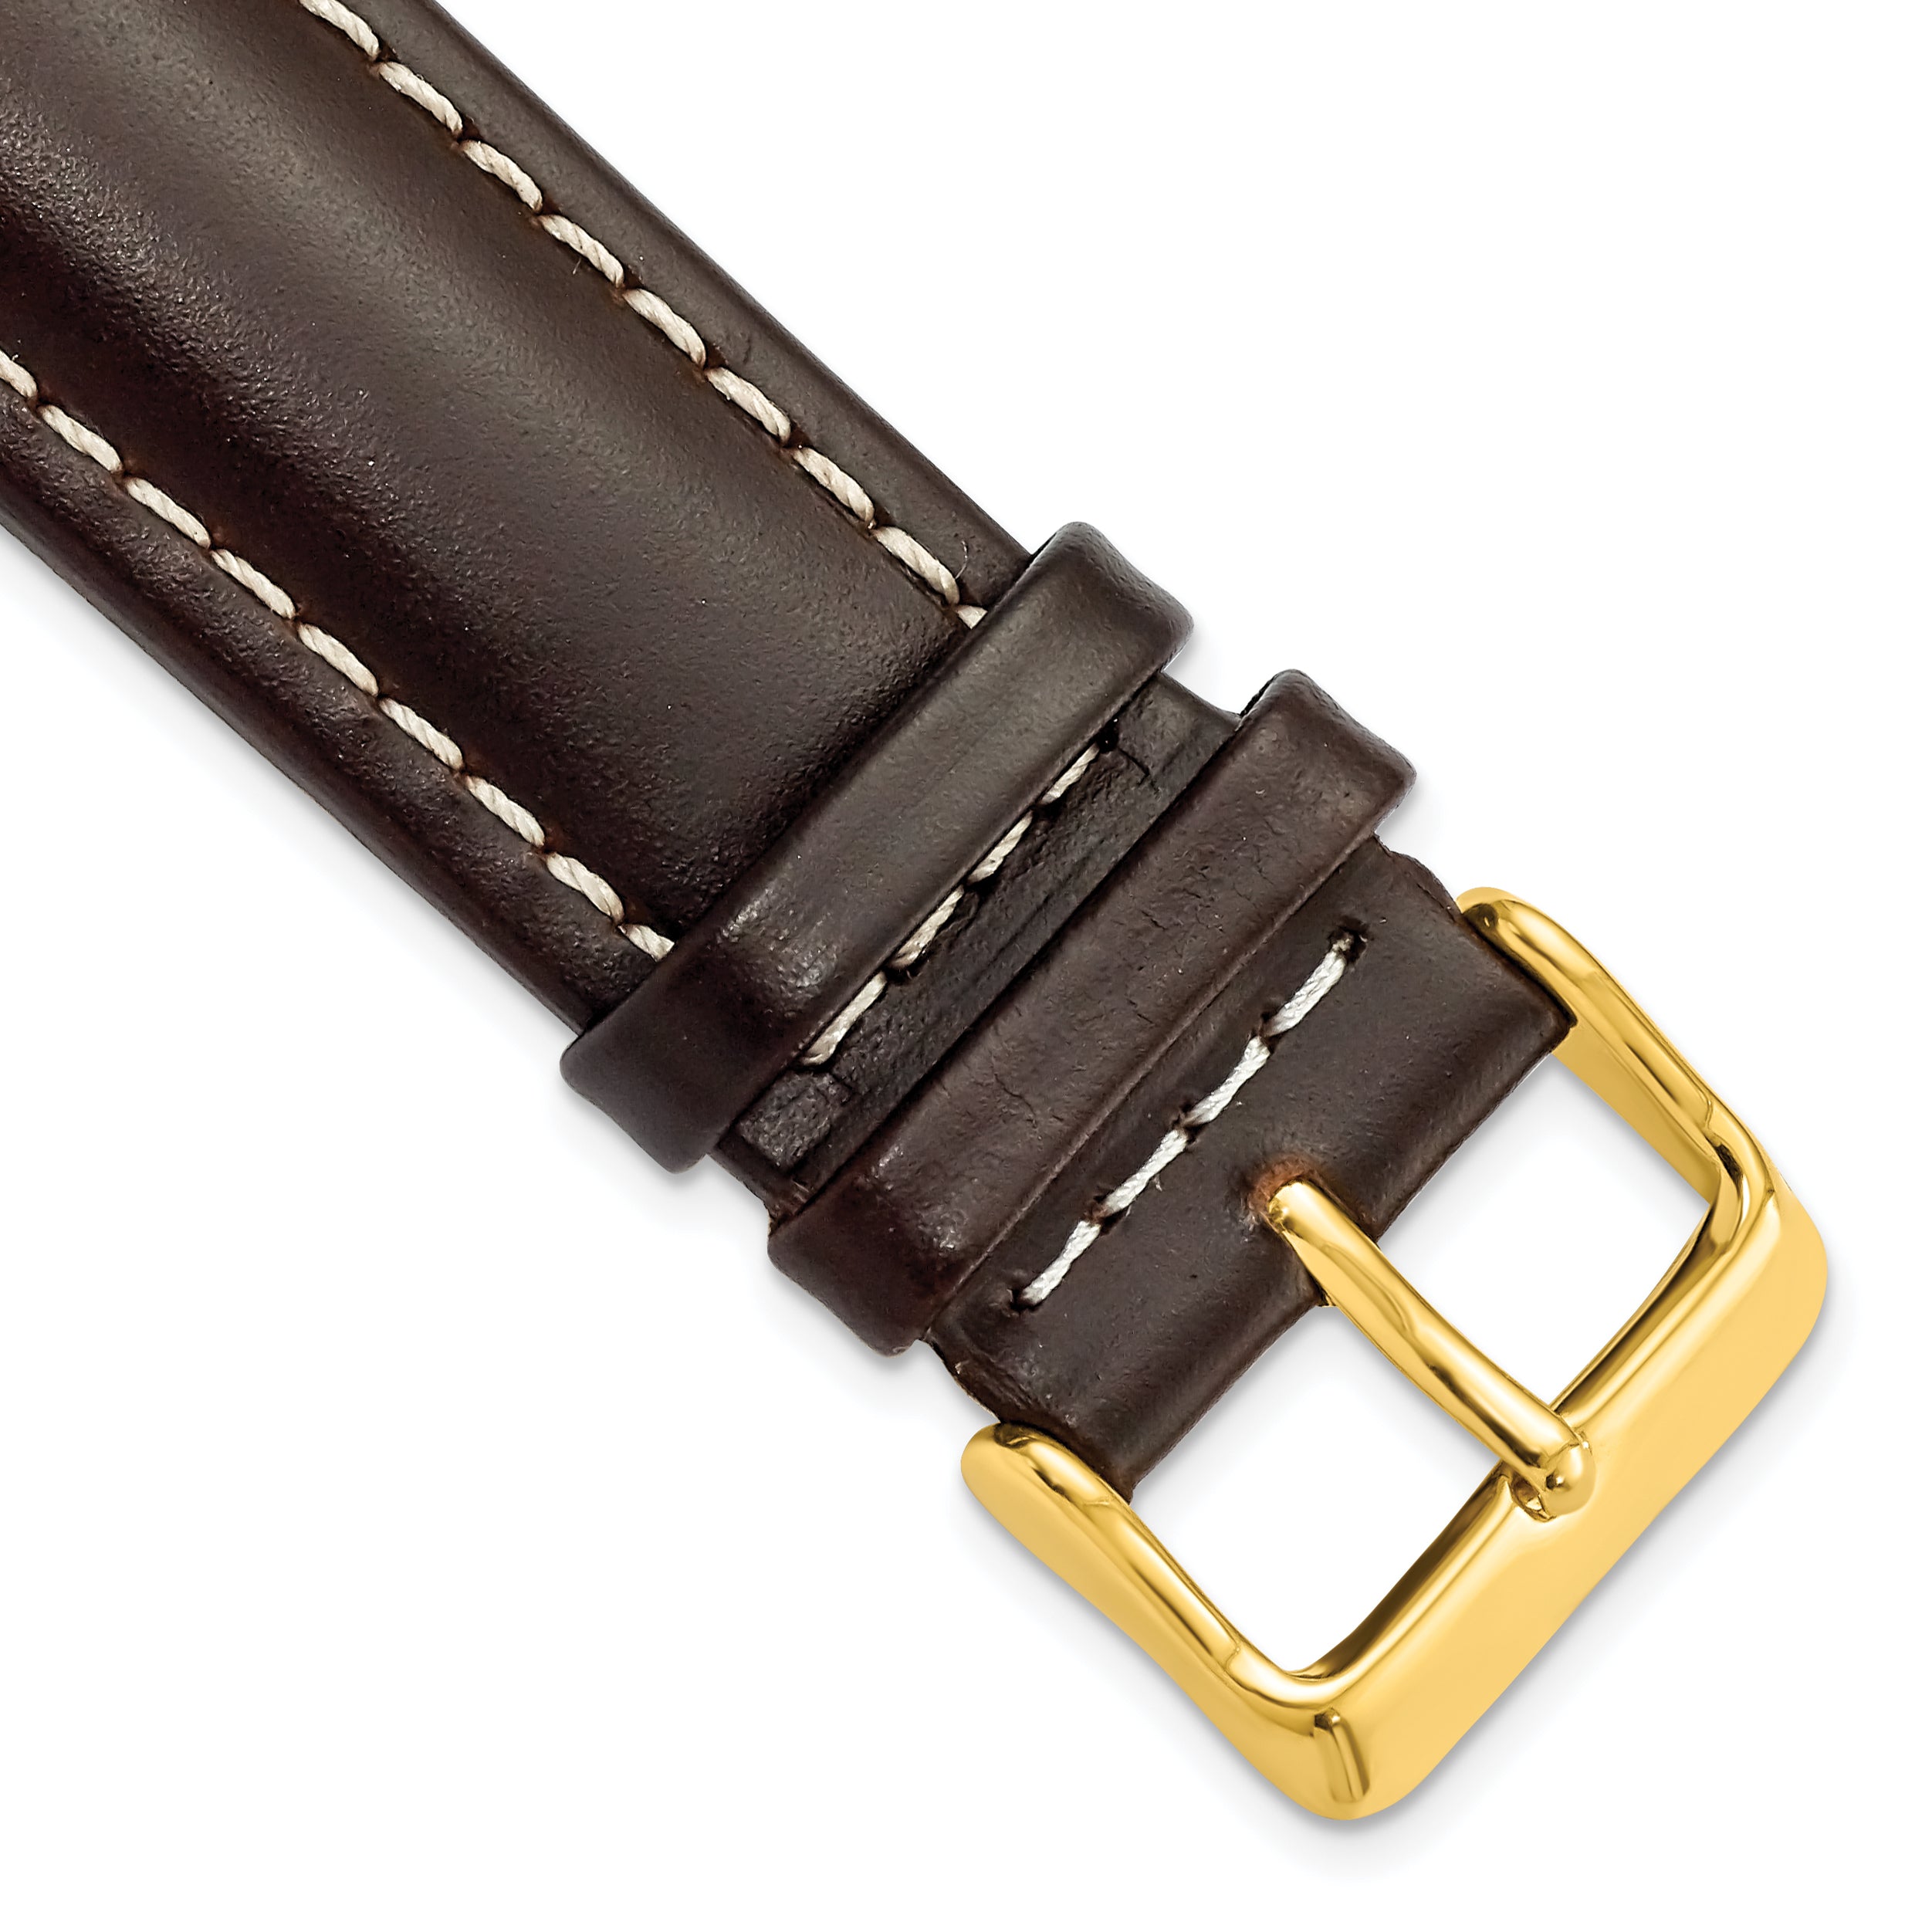 DeBeer 22mm Dark Brown Oil-tanned Leather with White Stitching and Gold-tone Buckle 7.5 inch Watch Band